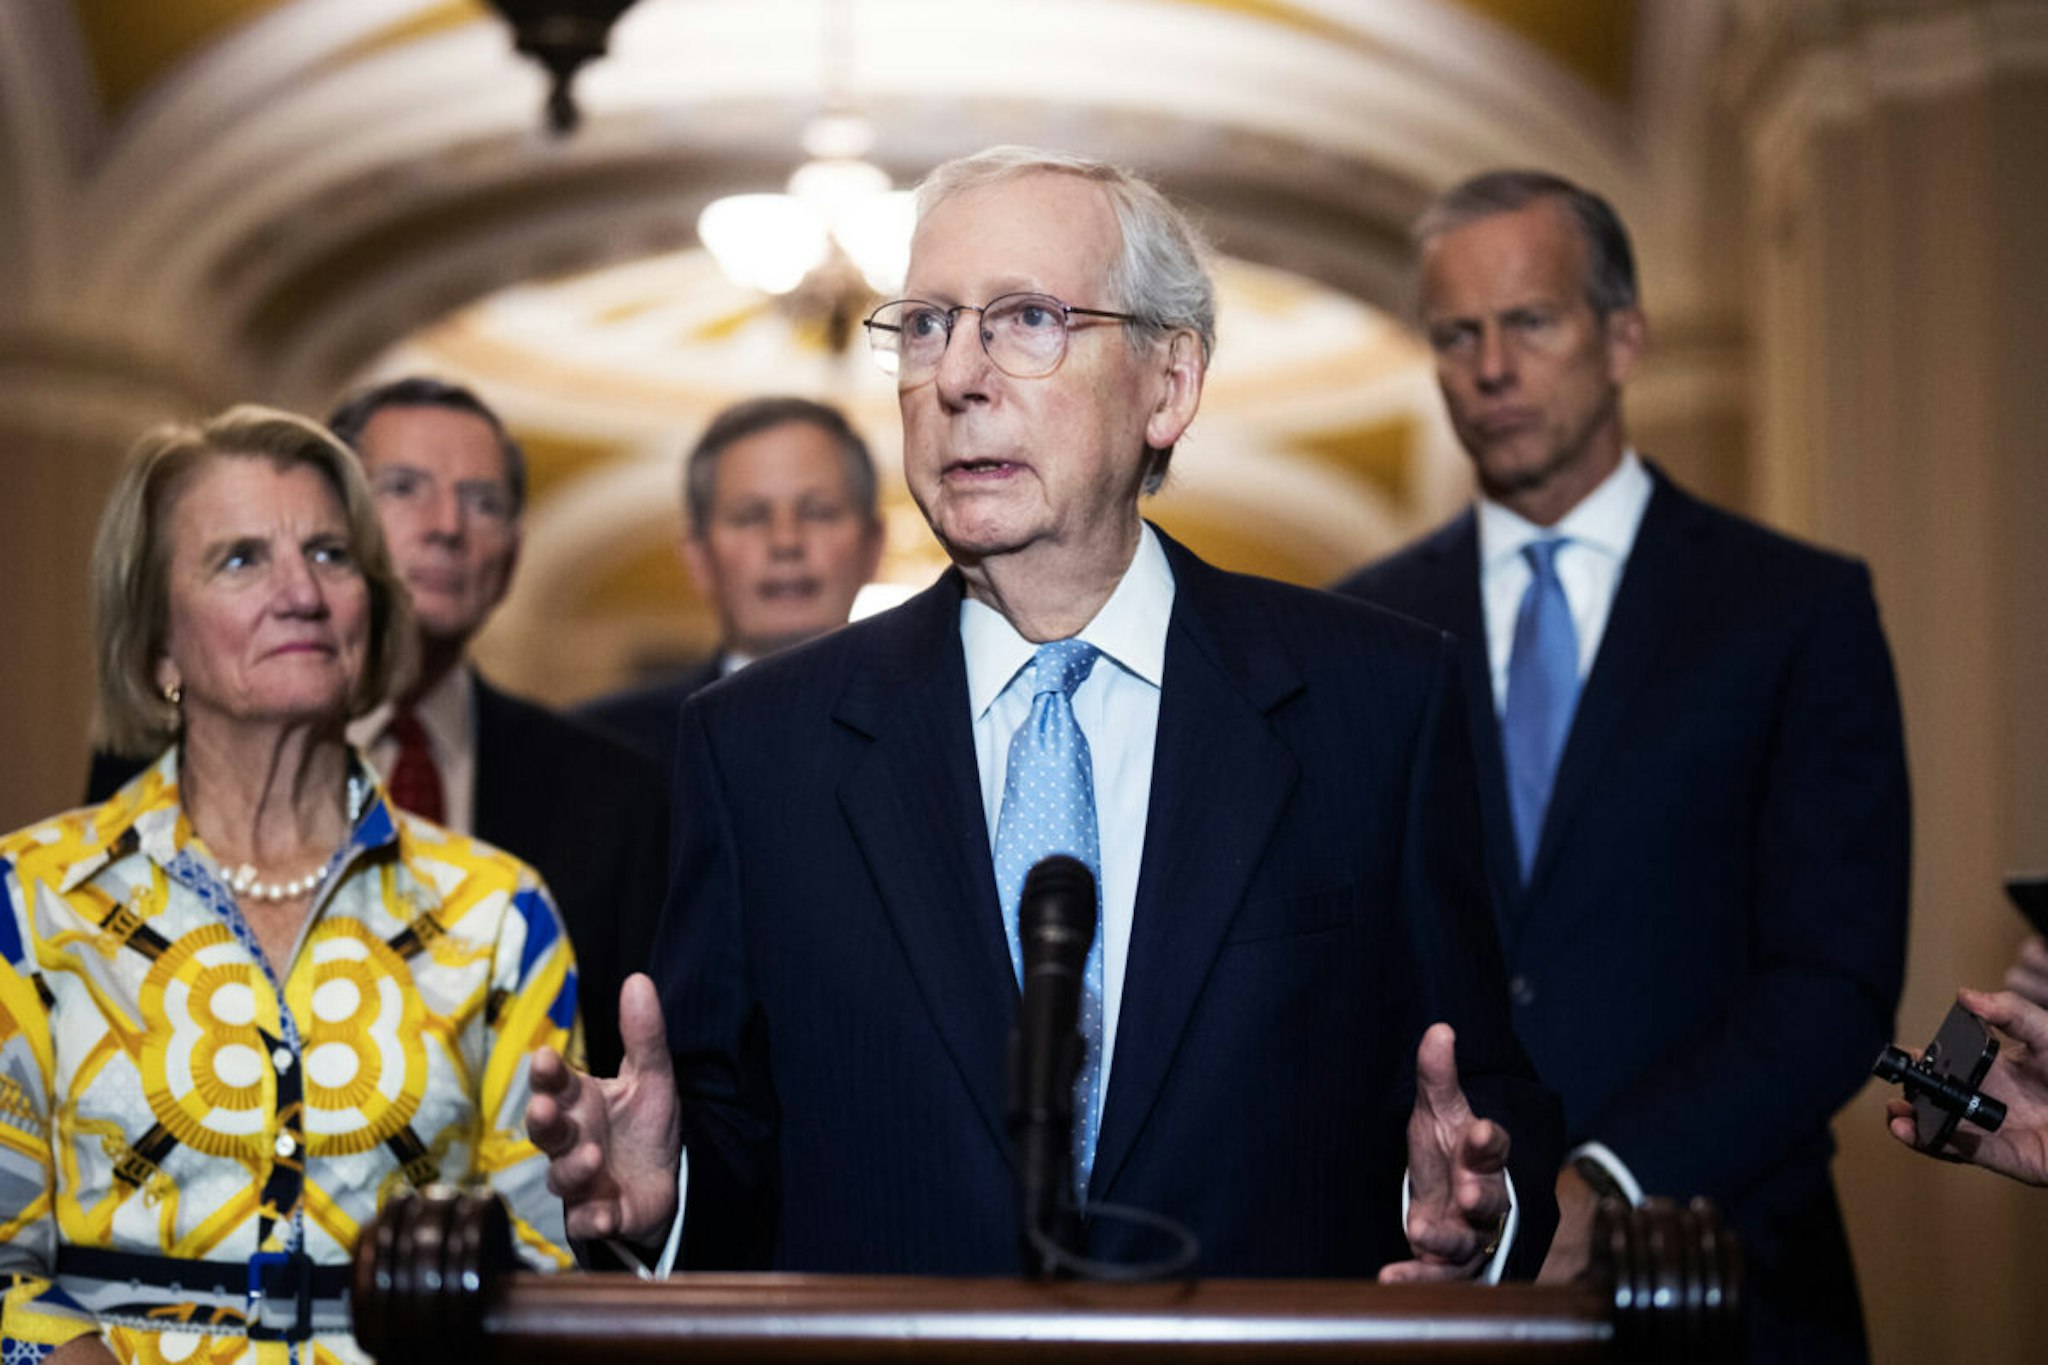 Senate Minority Leader Mitch McConnell, R-Ky., conducts a news conference after the senate luncheon in the U.S. Capitol on Wednesday, October 4, 2023.